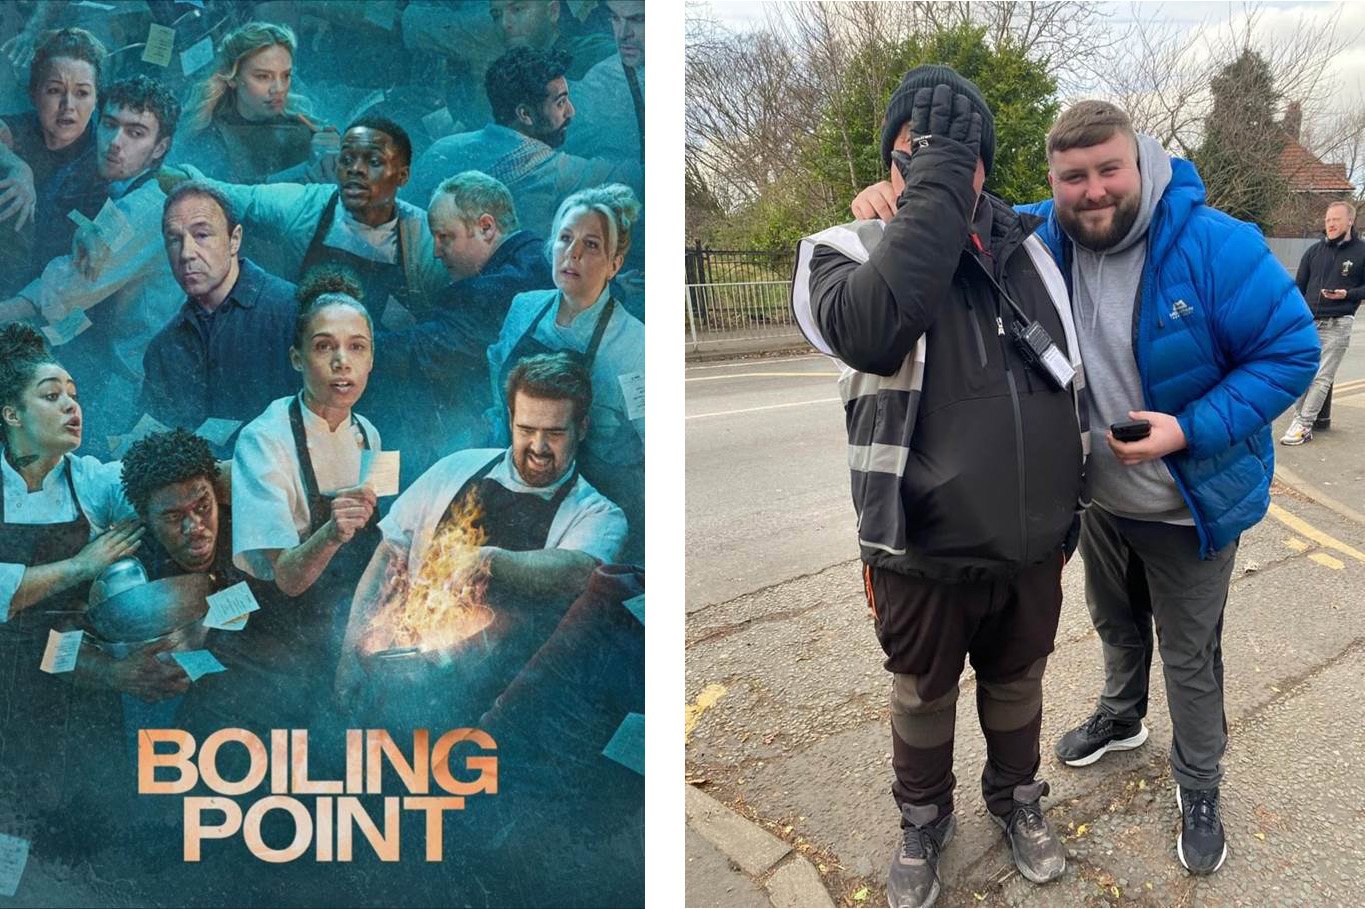 Smoking hot reviews on the latest Boiling Point